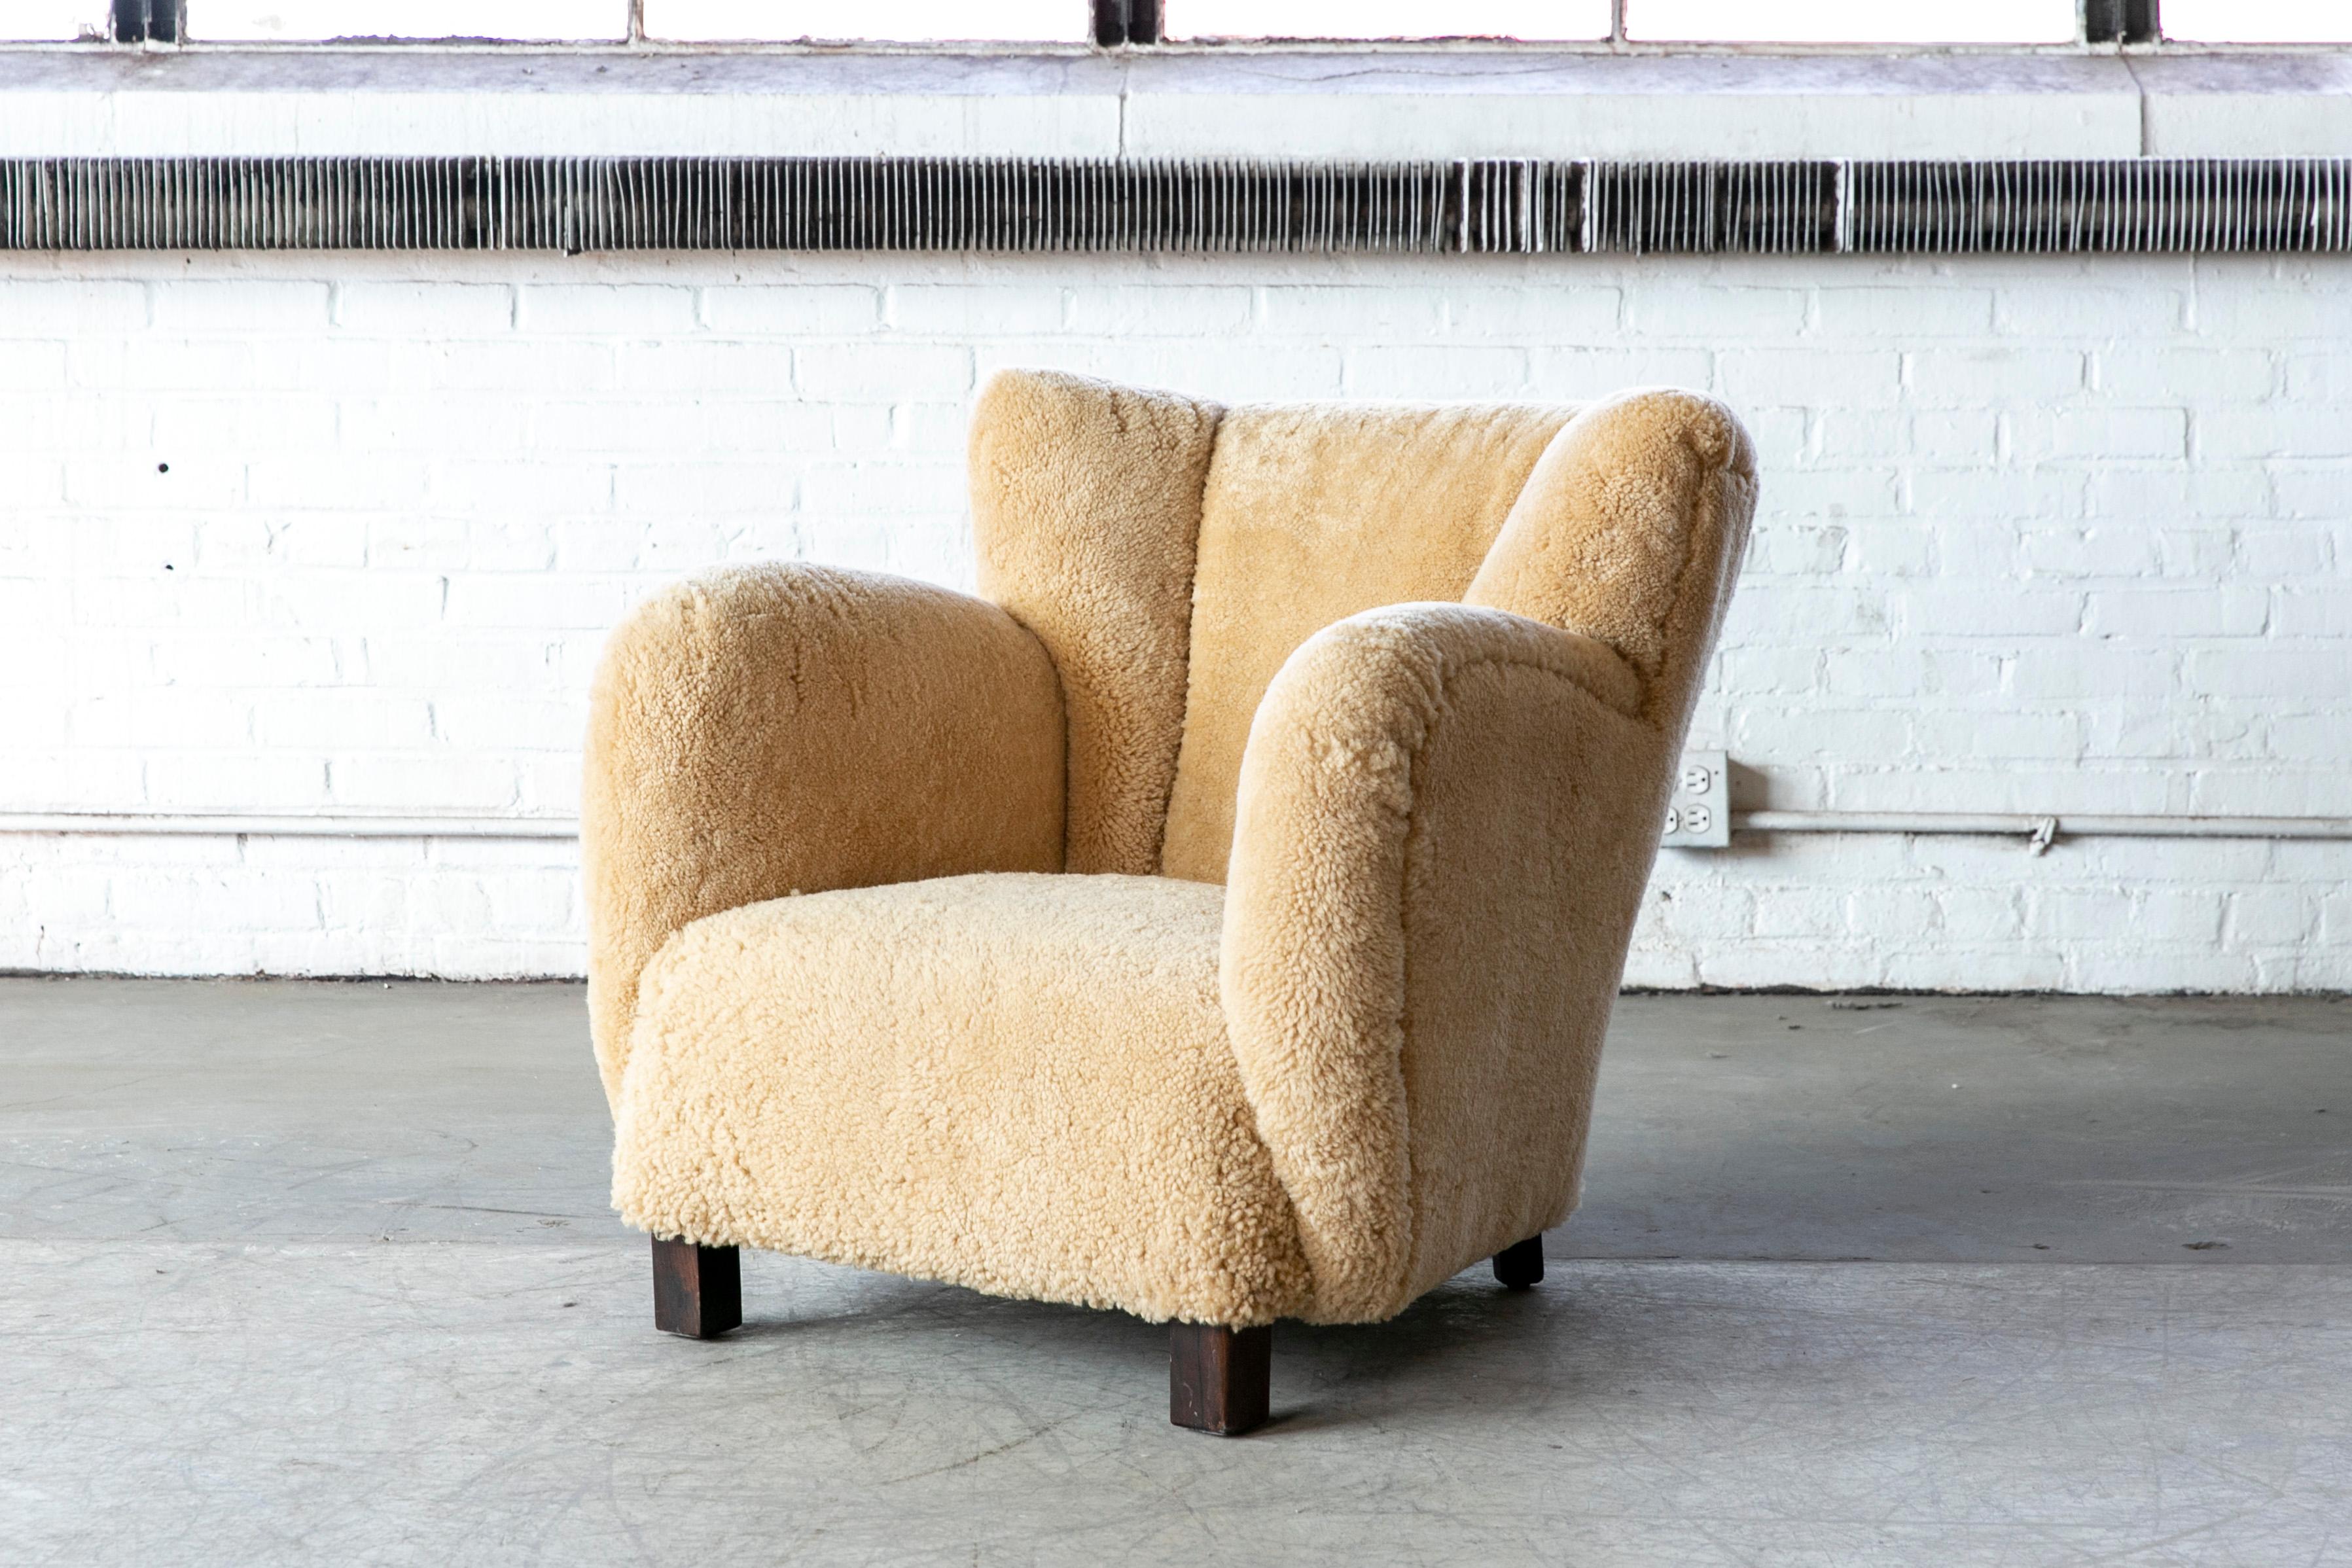 Super charming Mogens Lassen style lowback club or lounge chair from the 1940s featuring the rounded armrest design very characteristic of Lassen. Beautiful proportions and very organic lines. We have re-furbished and re-upholstered the chair in an